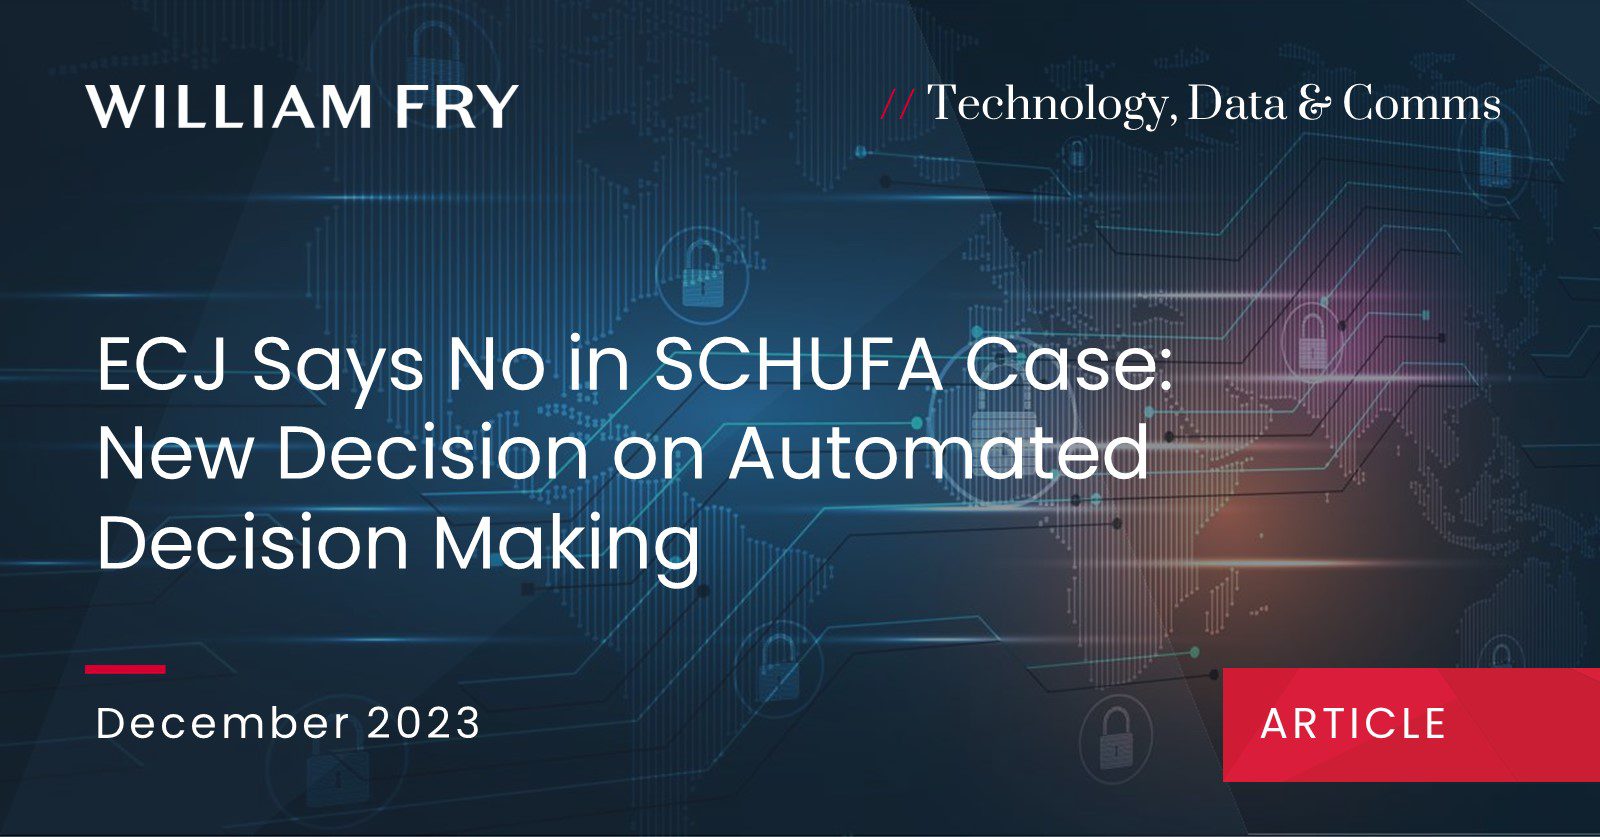 ECJ Says No in SCHUFA Case: New Decision on Automated Decision Making